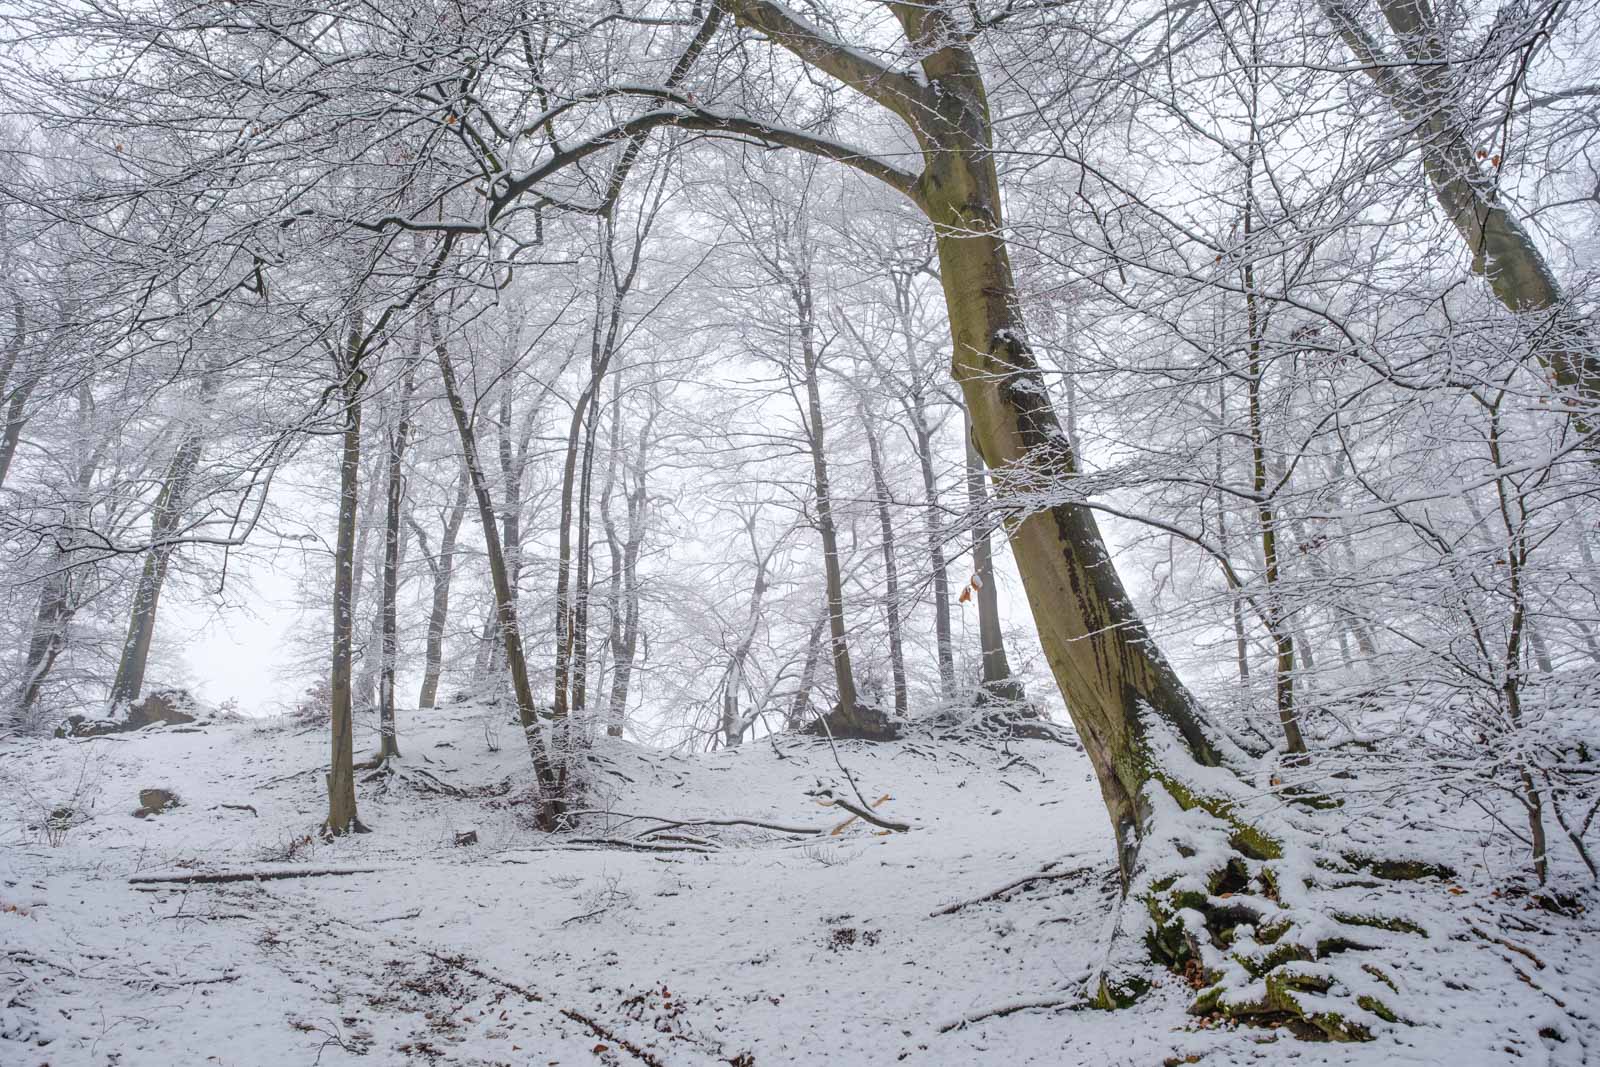 Winter in the Teutoburg Forest in January 2021 (Bielefeld, Germany).